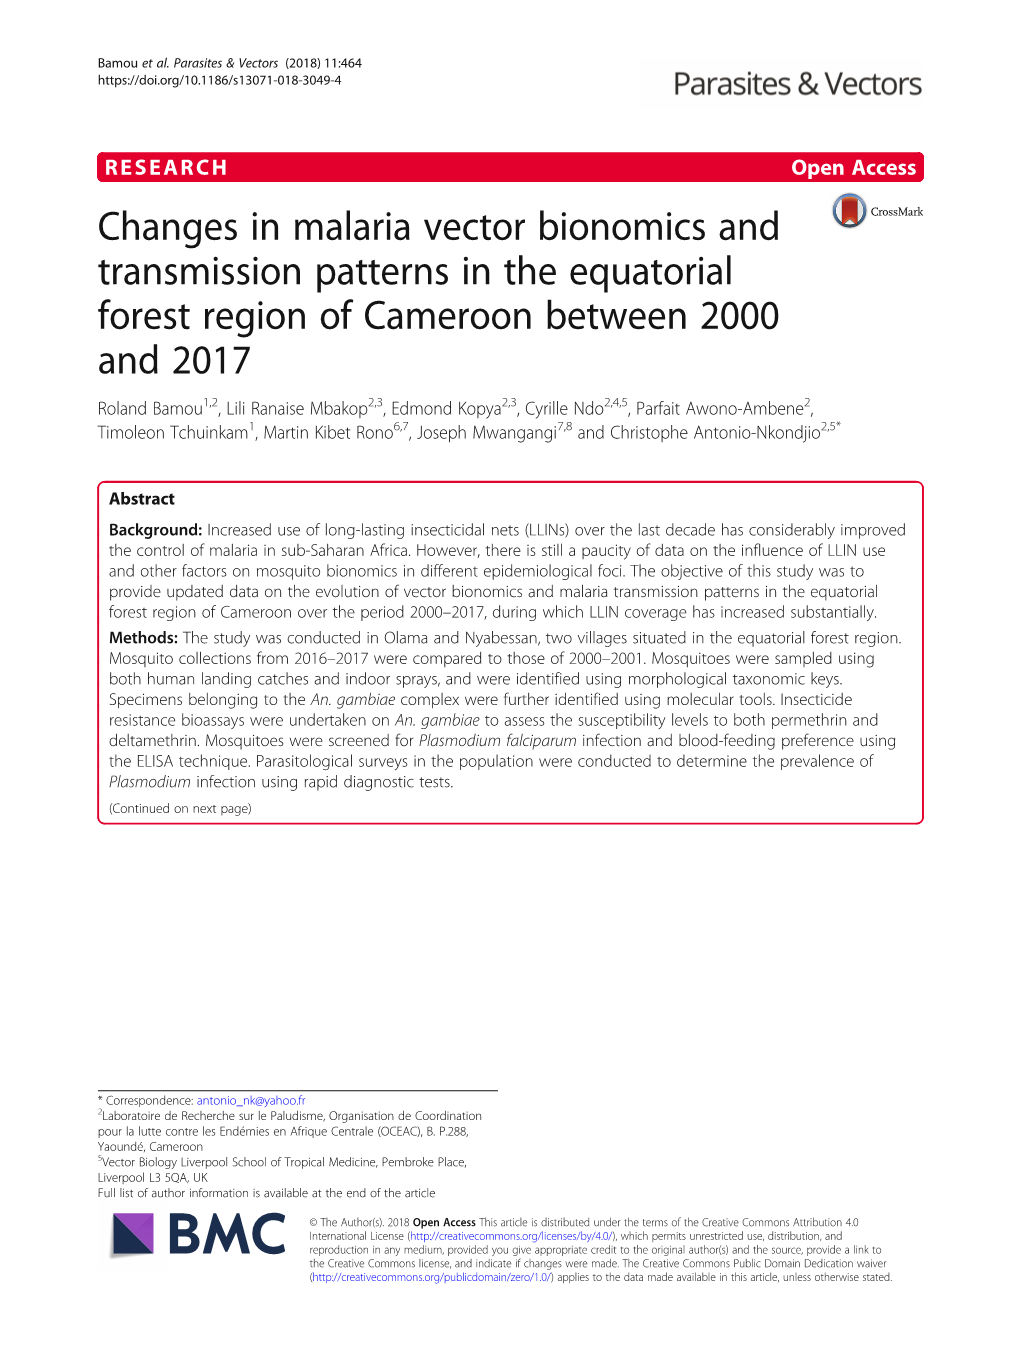 Changes in Malaria Vector Bionomics and Transmission Patterns in The